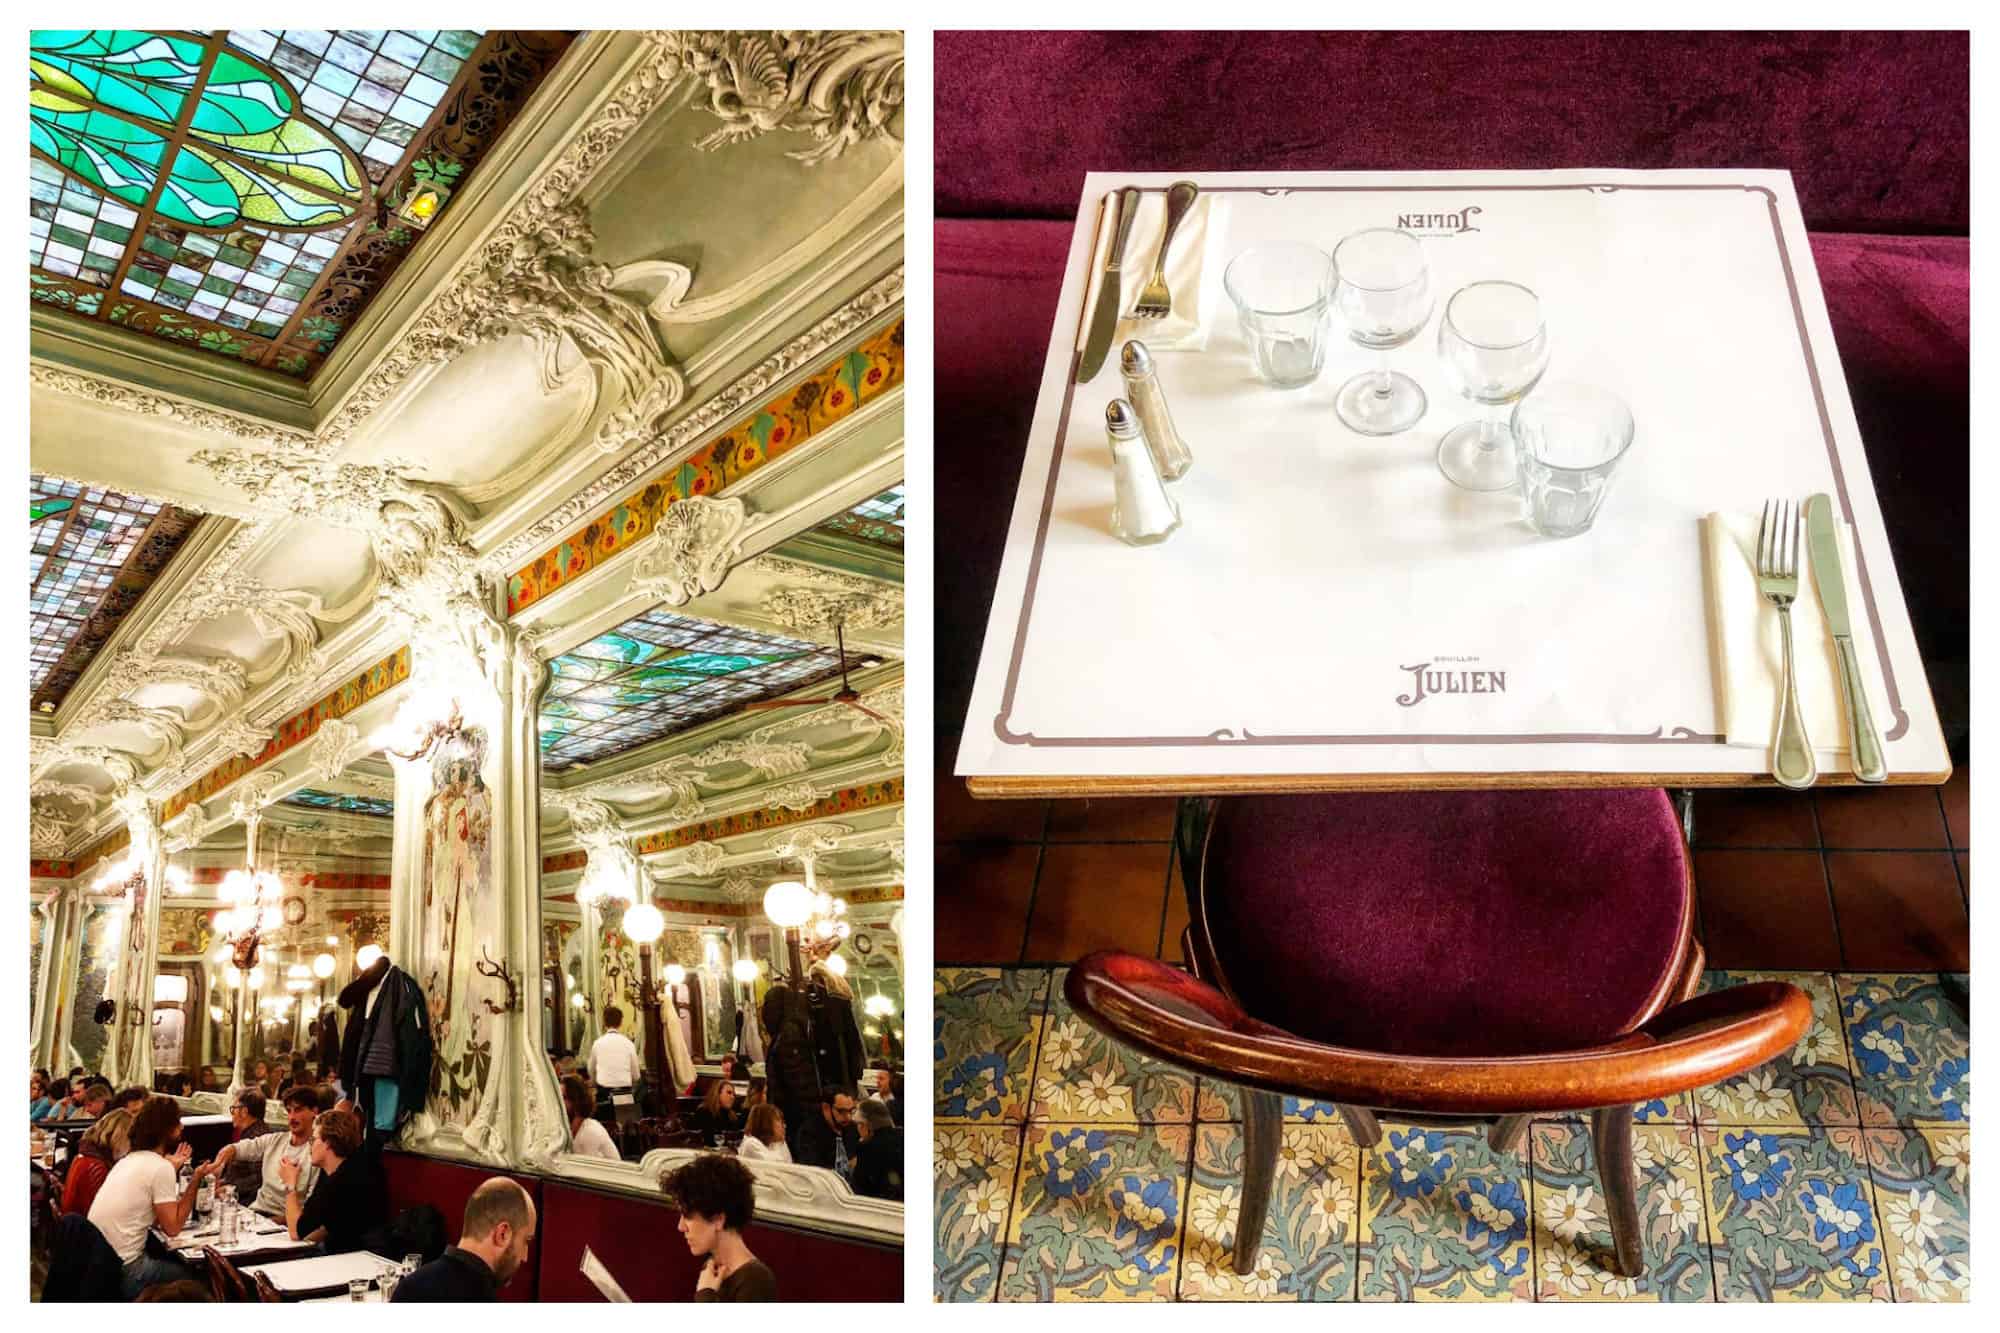 The ornate moldings and stained glass ceiling (left) and stylish bistro table and chair on original period tiles (right) at Bouillon Julien restaurant Paris. 